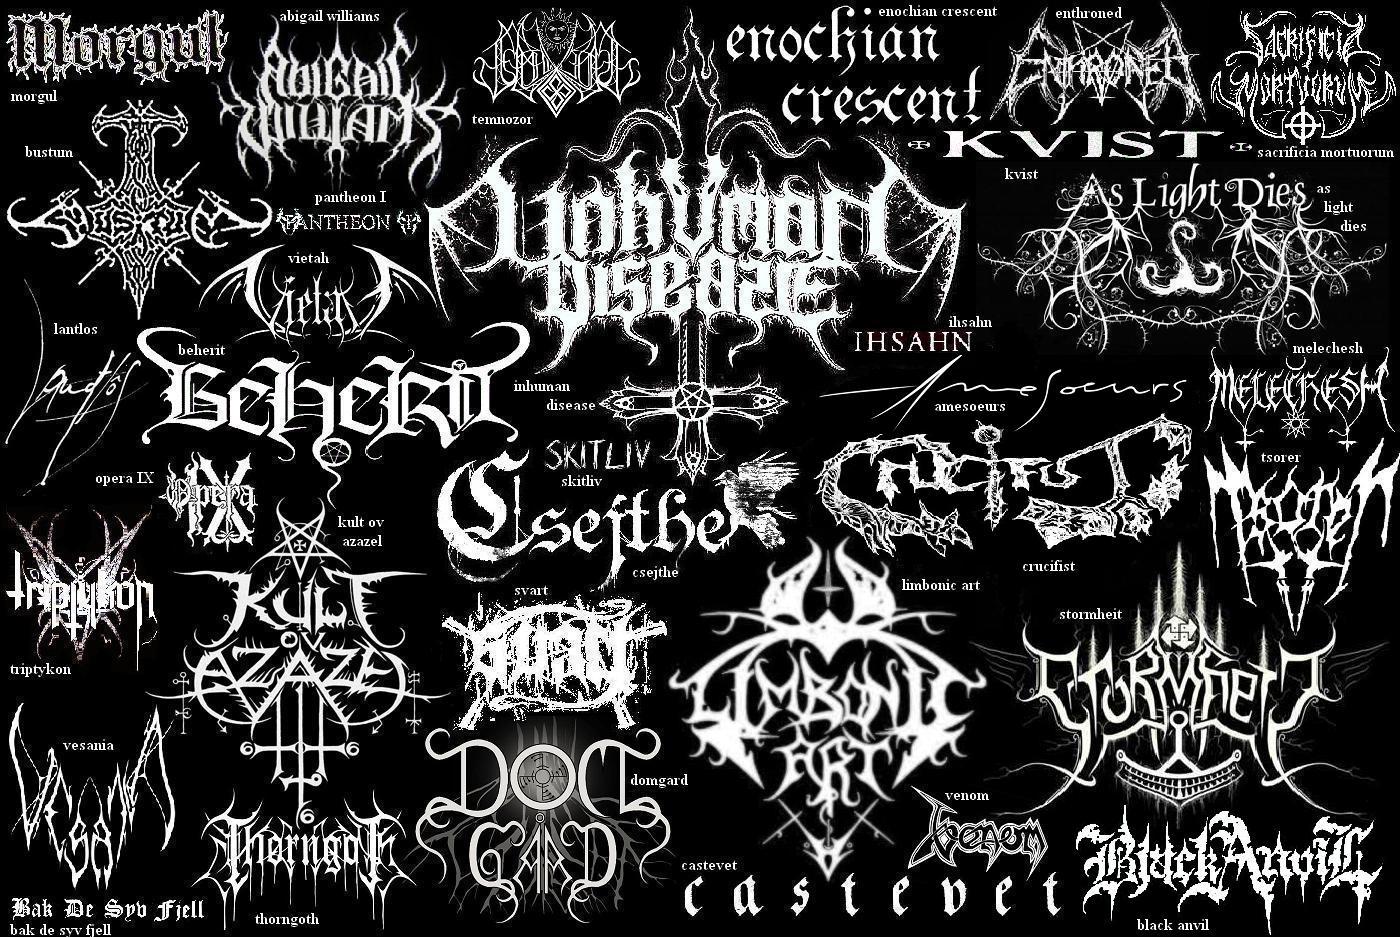 Black Metal Bands Image And Quotes. QuotesGram